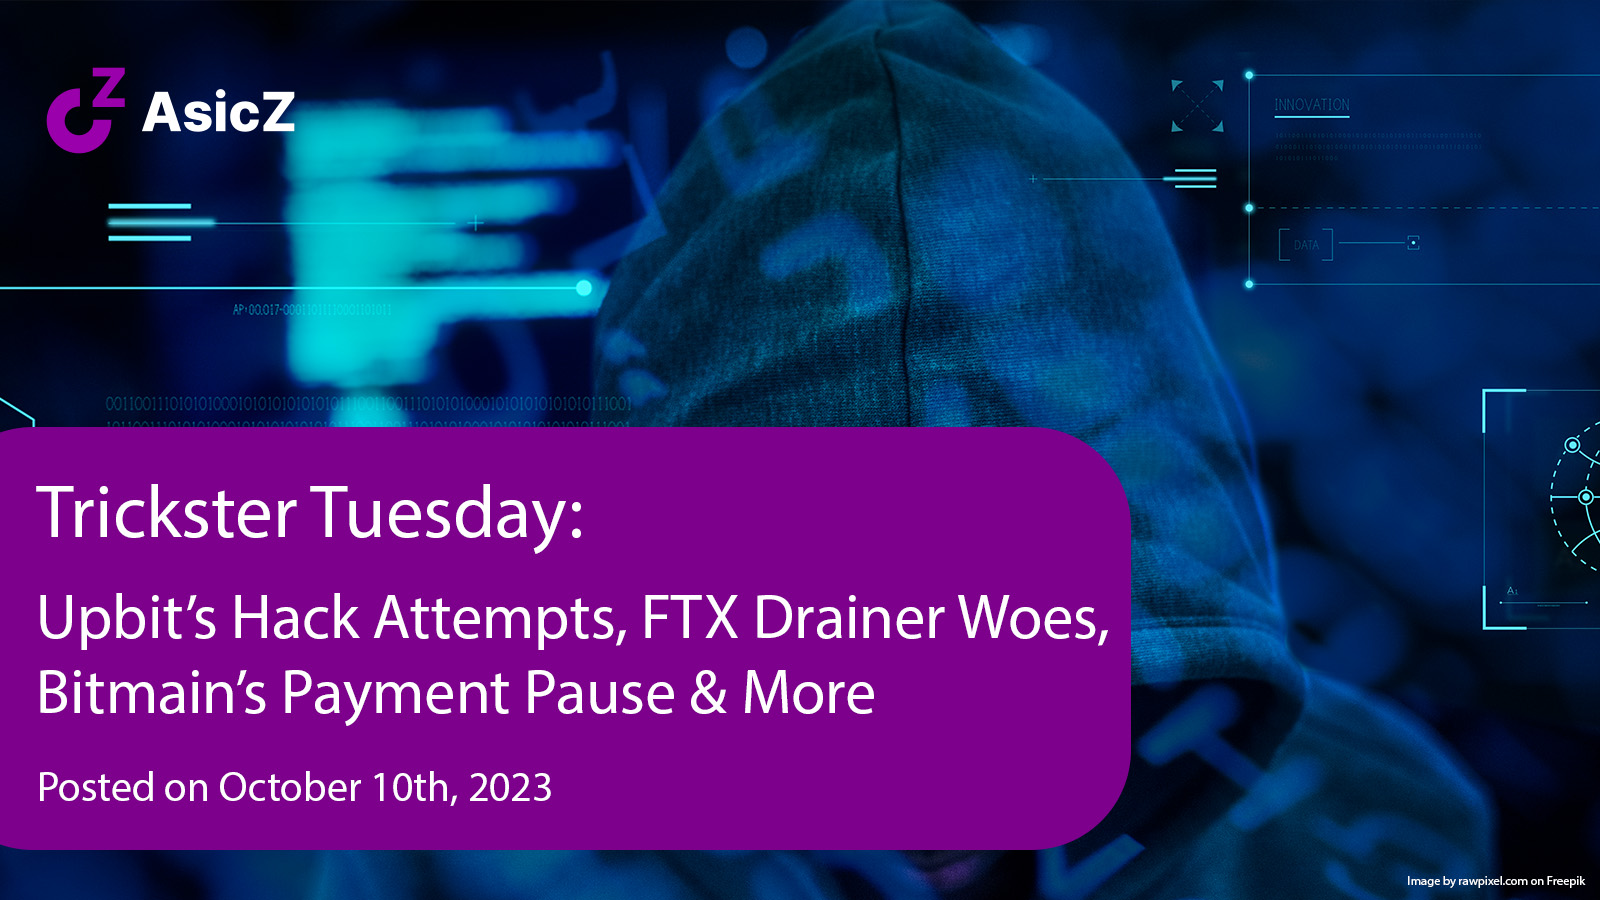 Trickster Tuesday: Upbit’s Hack Attempts, FTX Drainer Woes, Bitmain’s Payment Pause & More